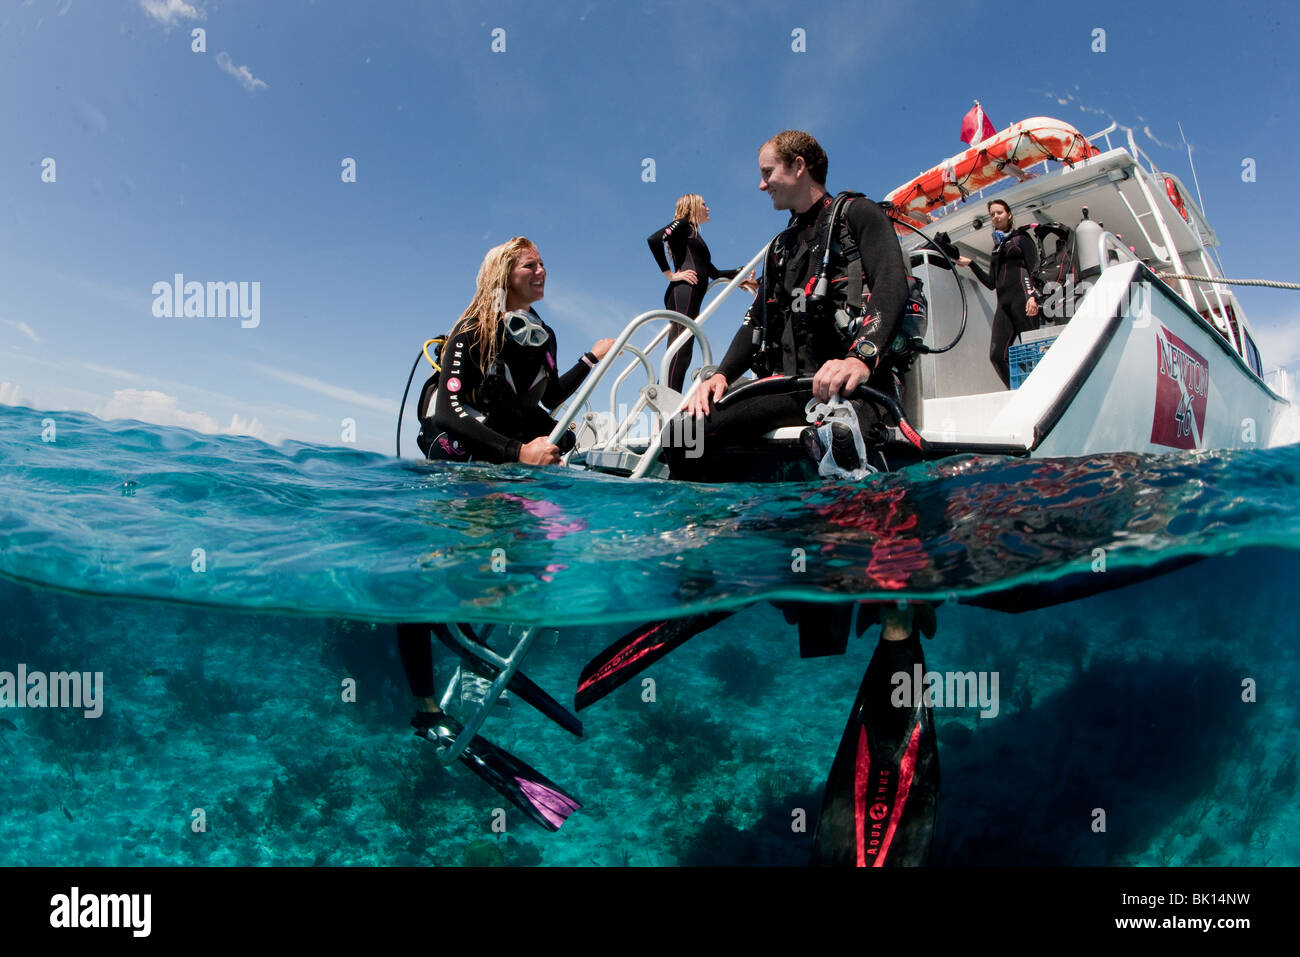 Scuba divers relax at the dive platform of a boat Stock Photo